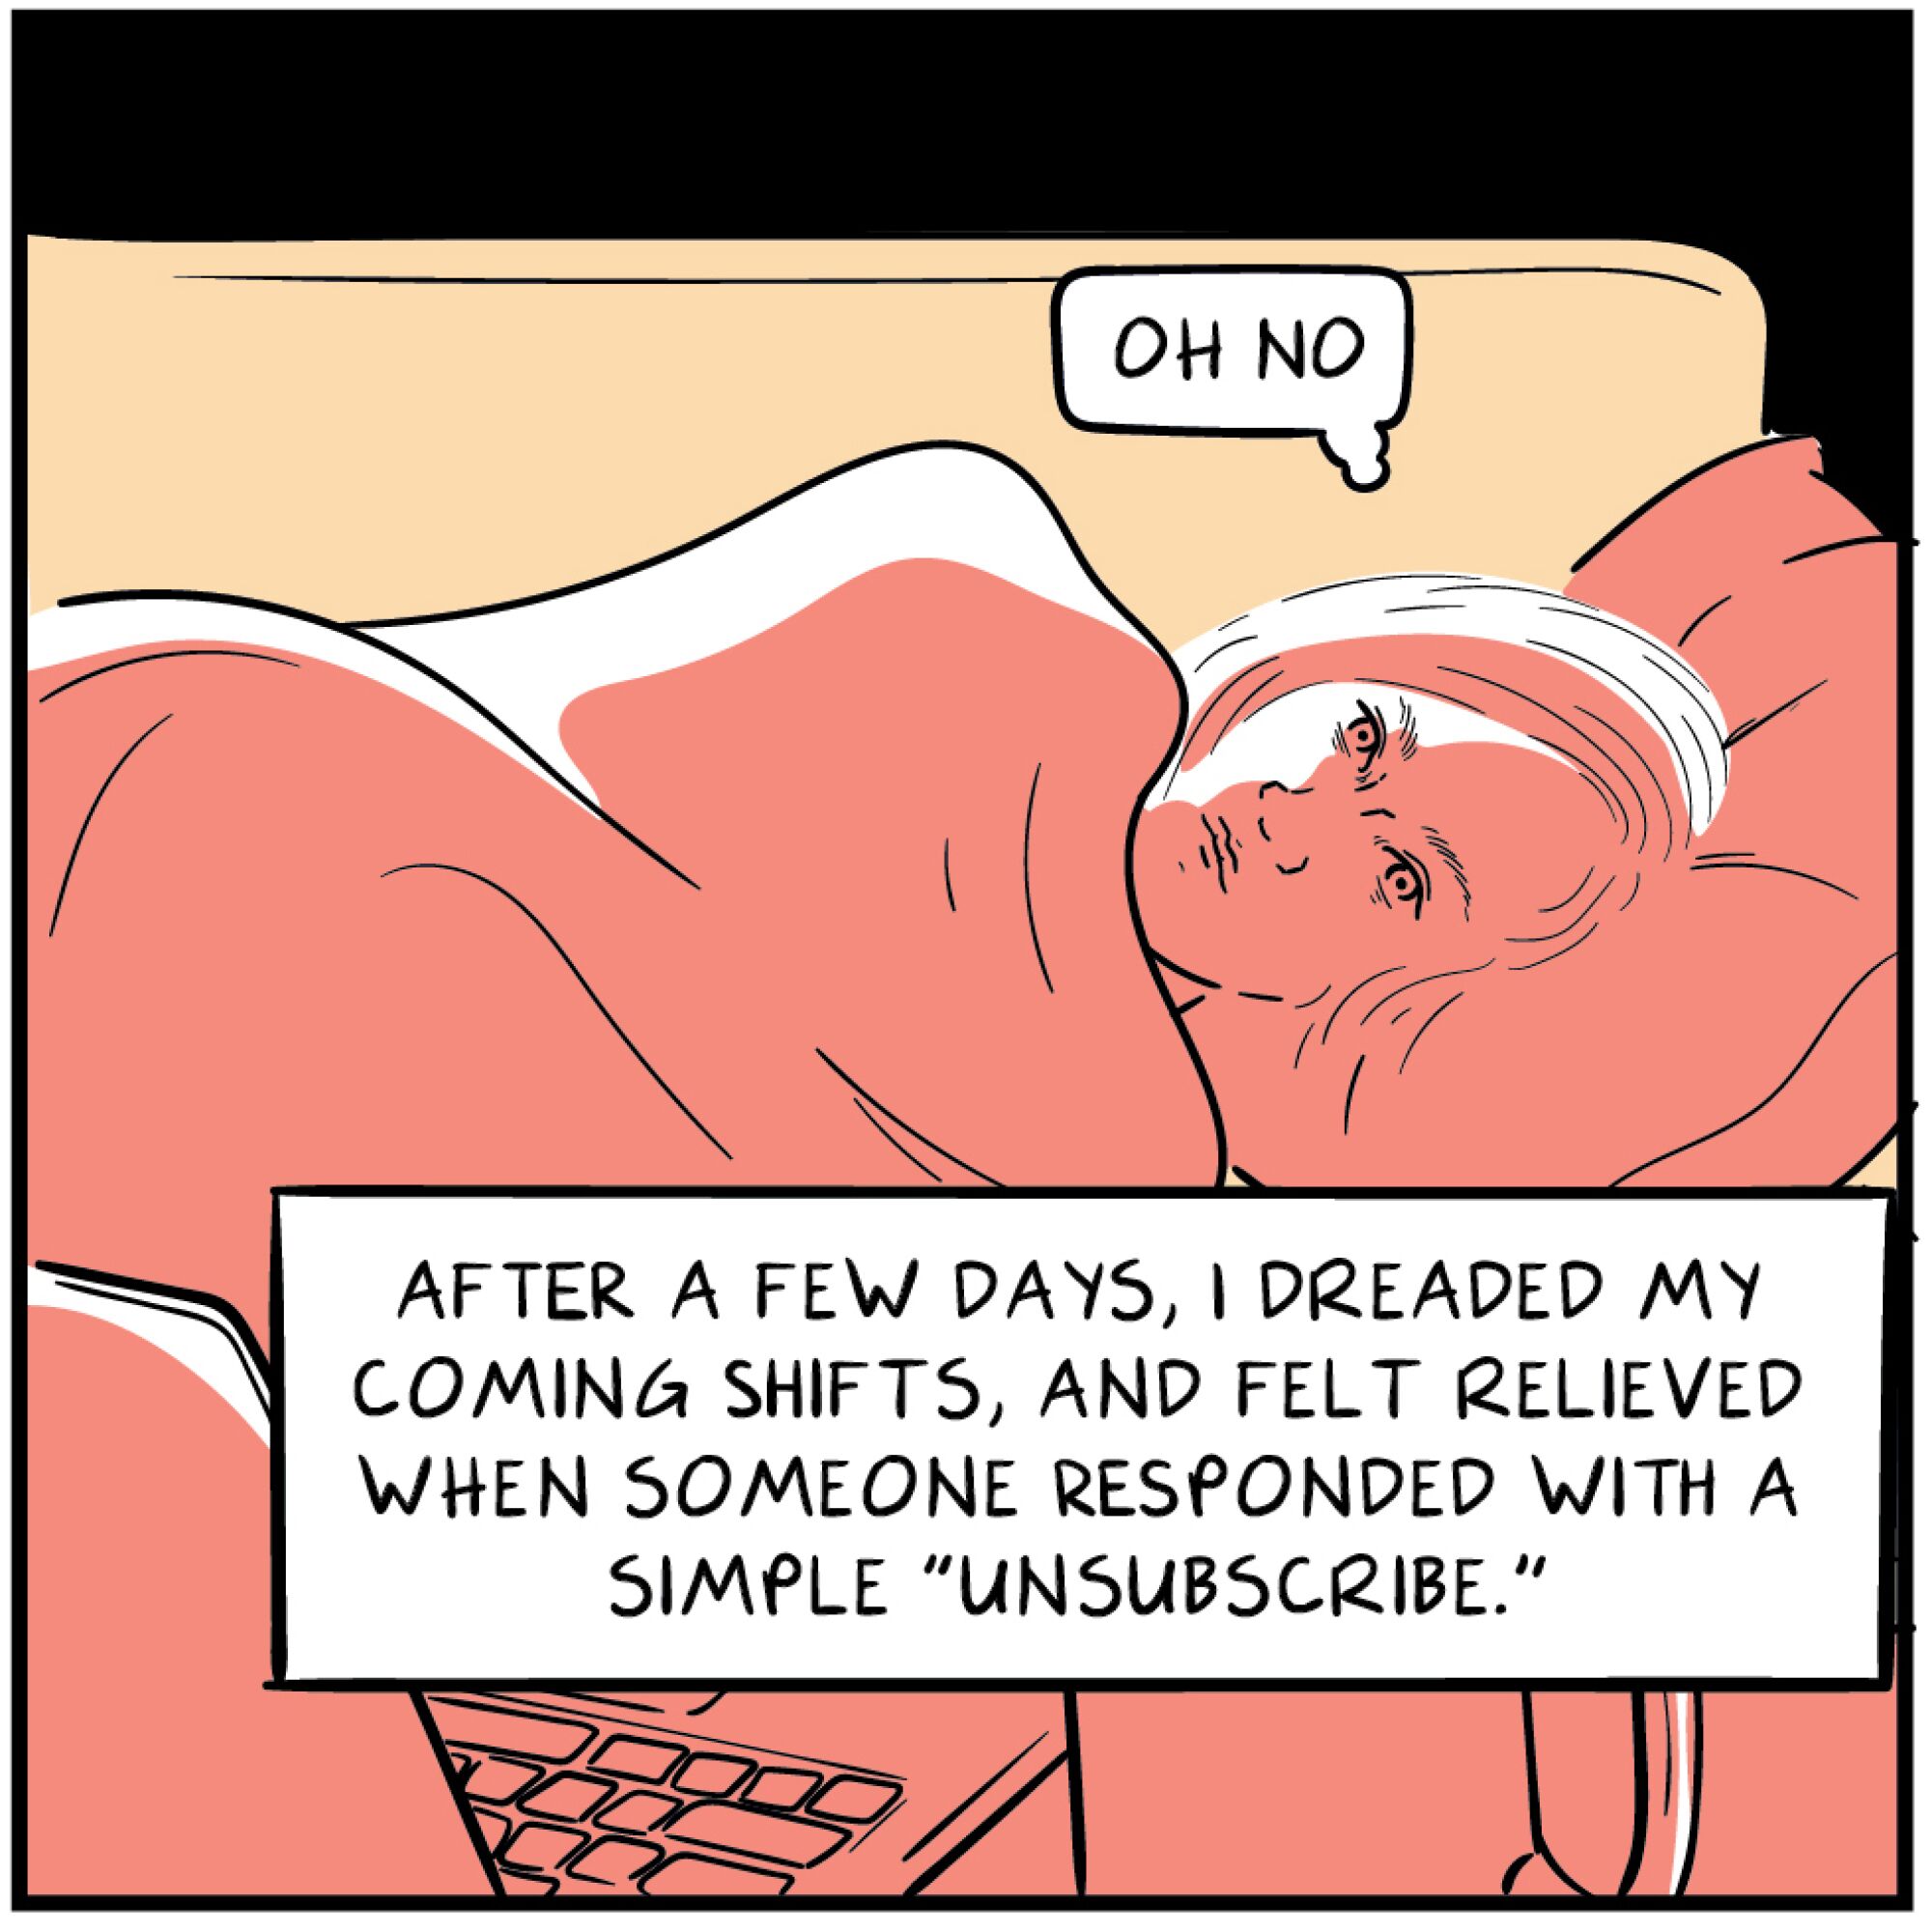 Comic panel of a woman lying on a couch awake with dread